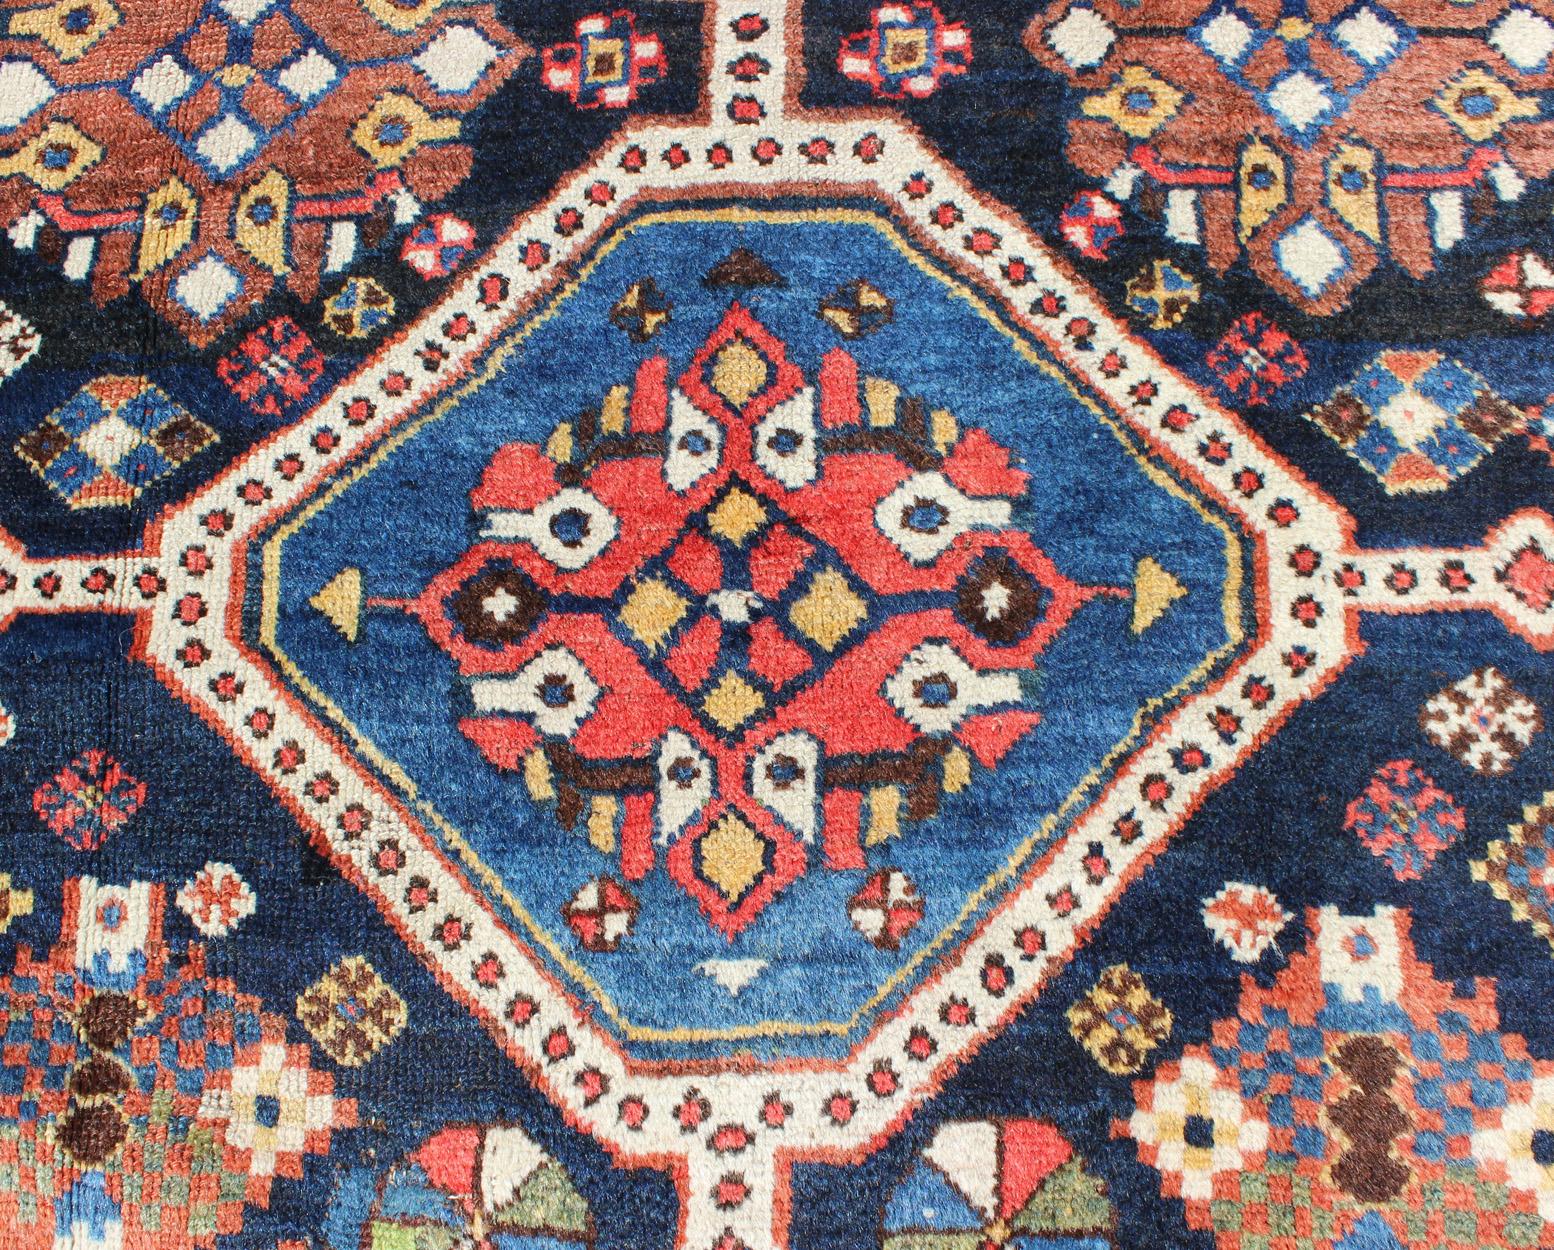 Wool Antique Persian Qashqai Rug with Four-Medallion Design in Blue, Red, Brown Tones For Sale